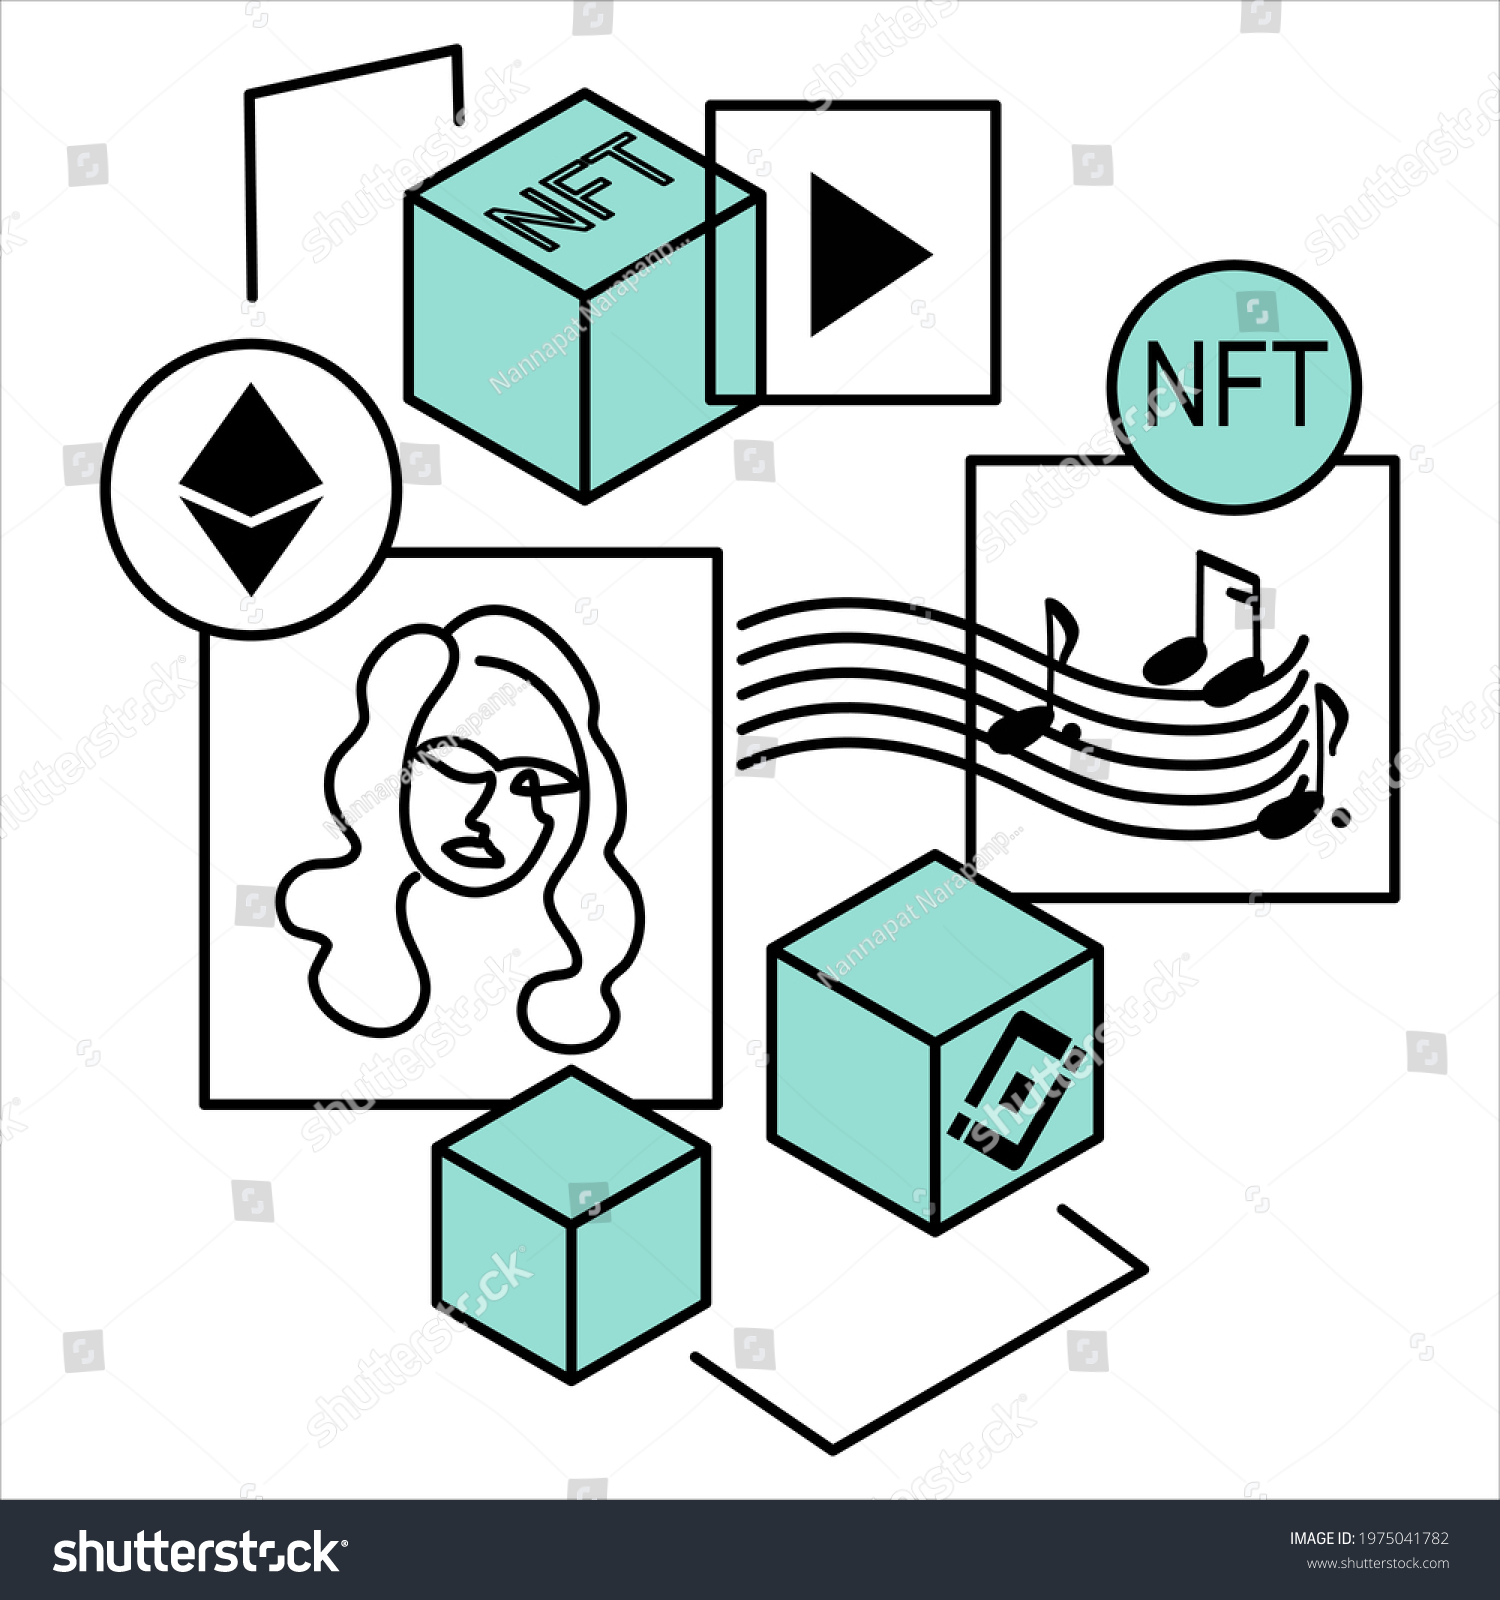 SVG of NFT - Non-Fungible Token, binance chain and euthereum chain vector illustration in infographic icon style svg